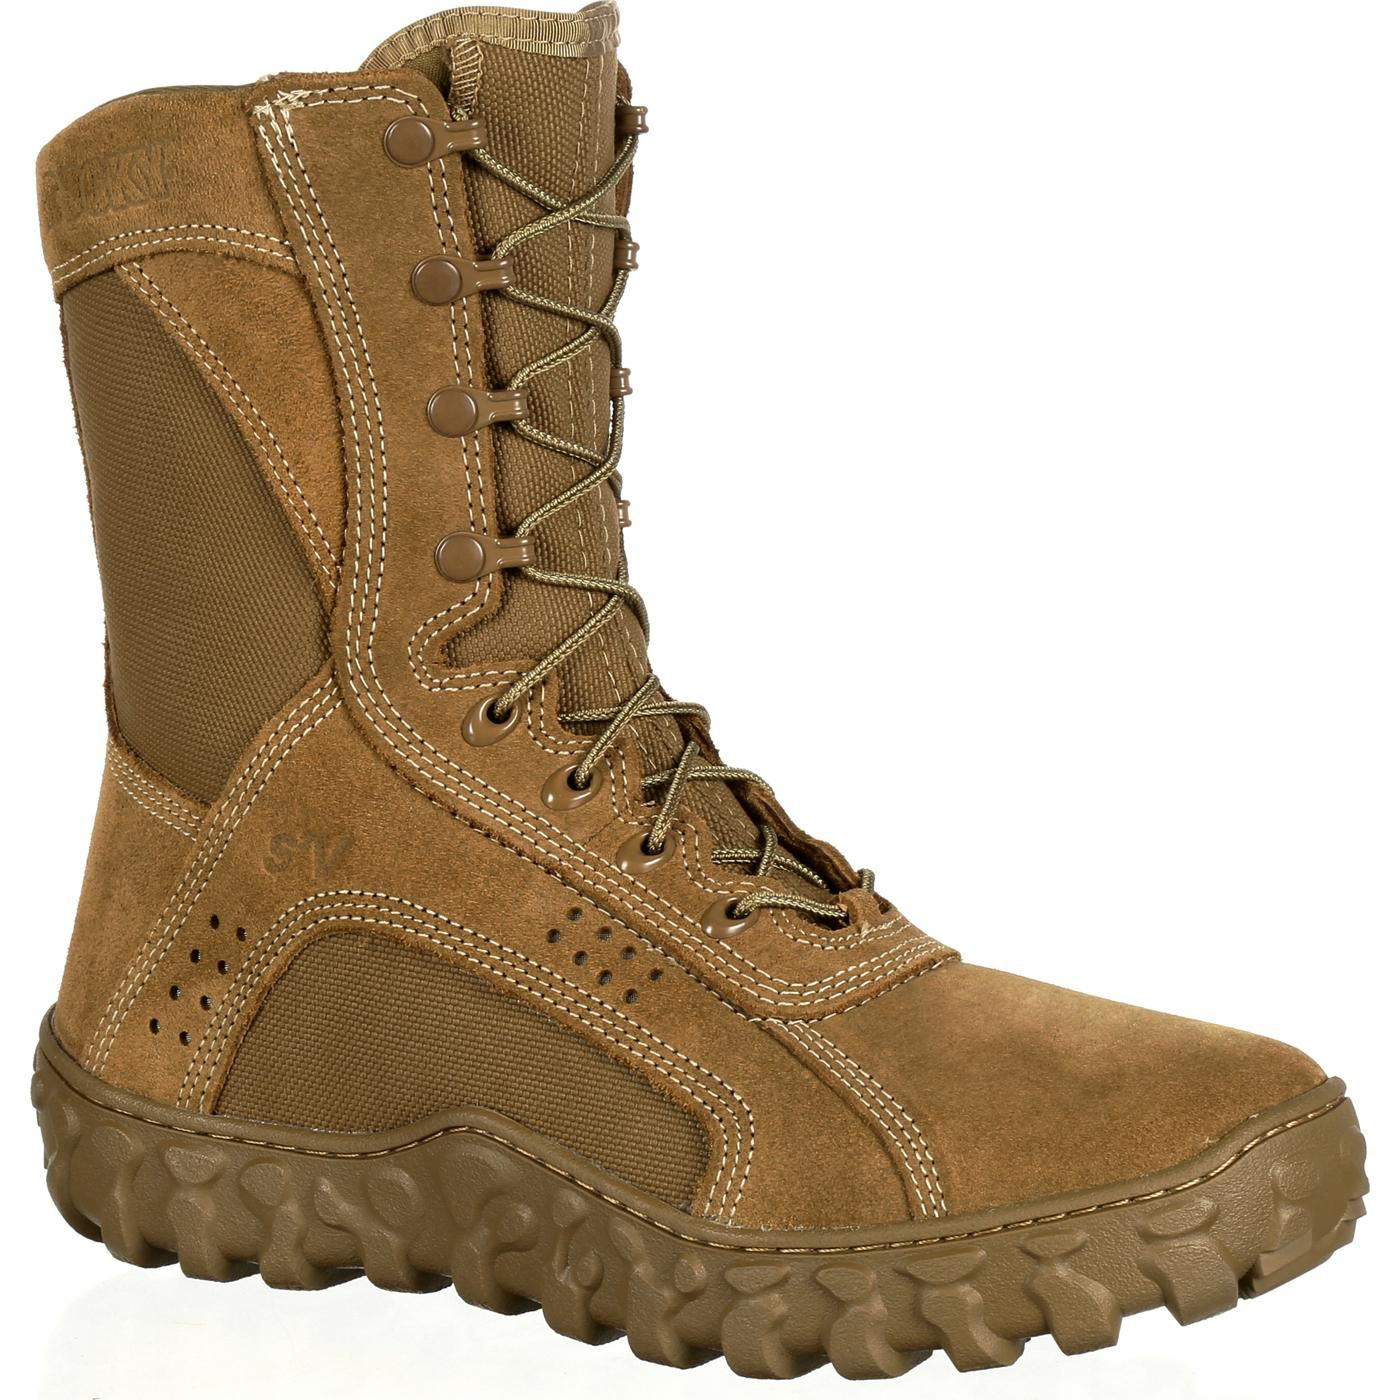 Rocky S2V Tactical Military Boots for Men - Coyote Brown - 6.5W